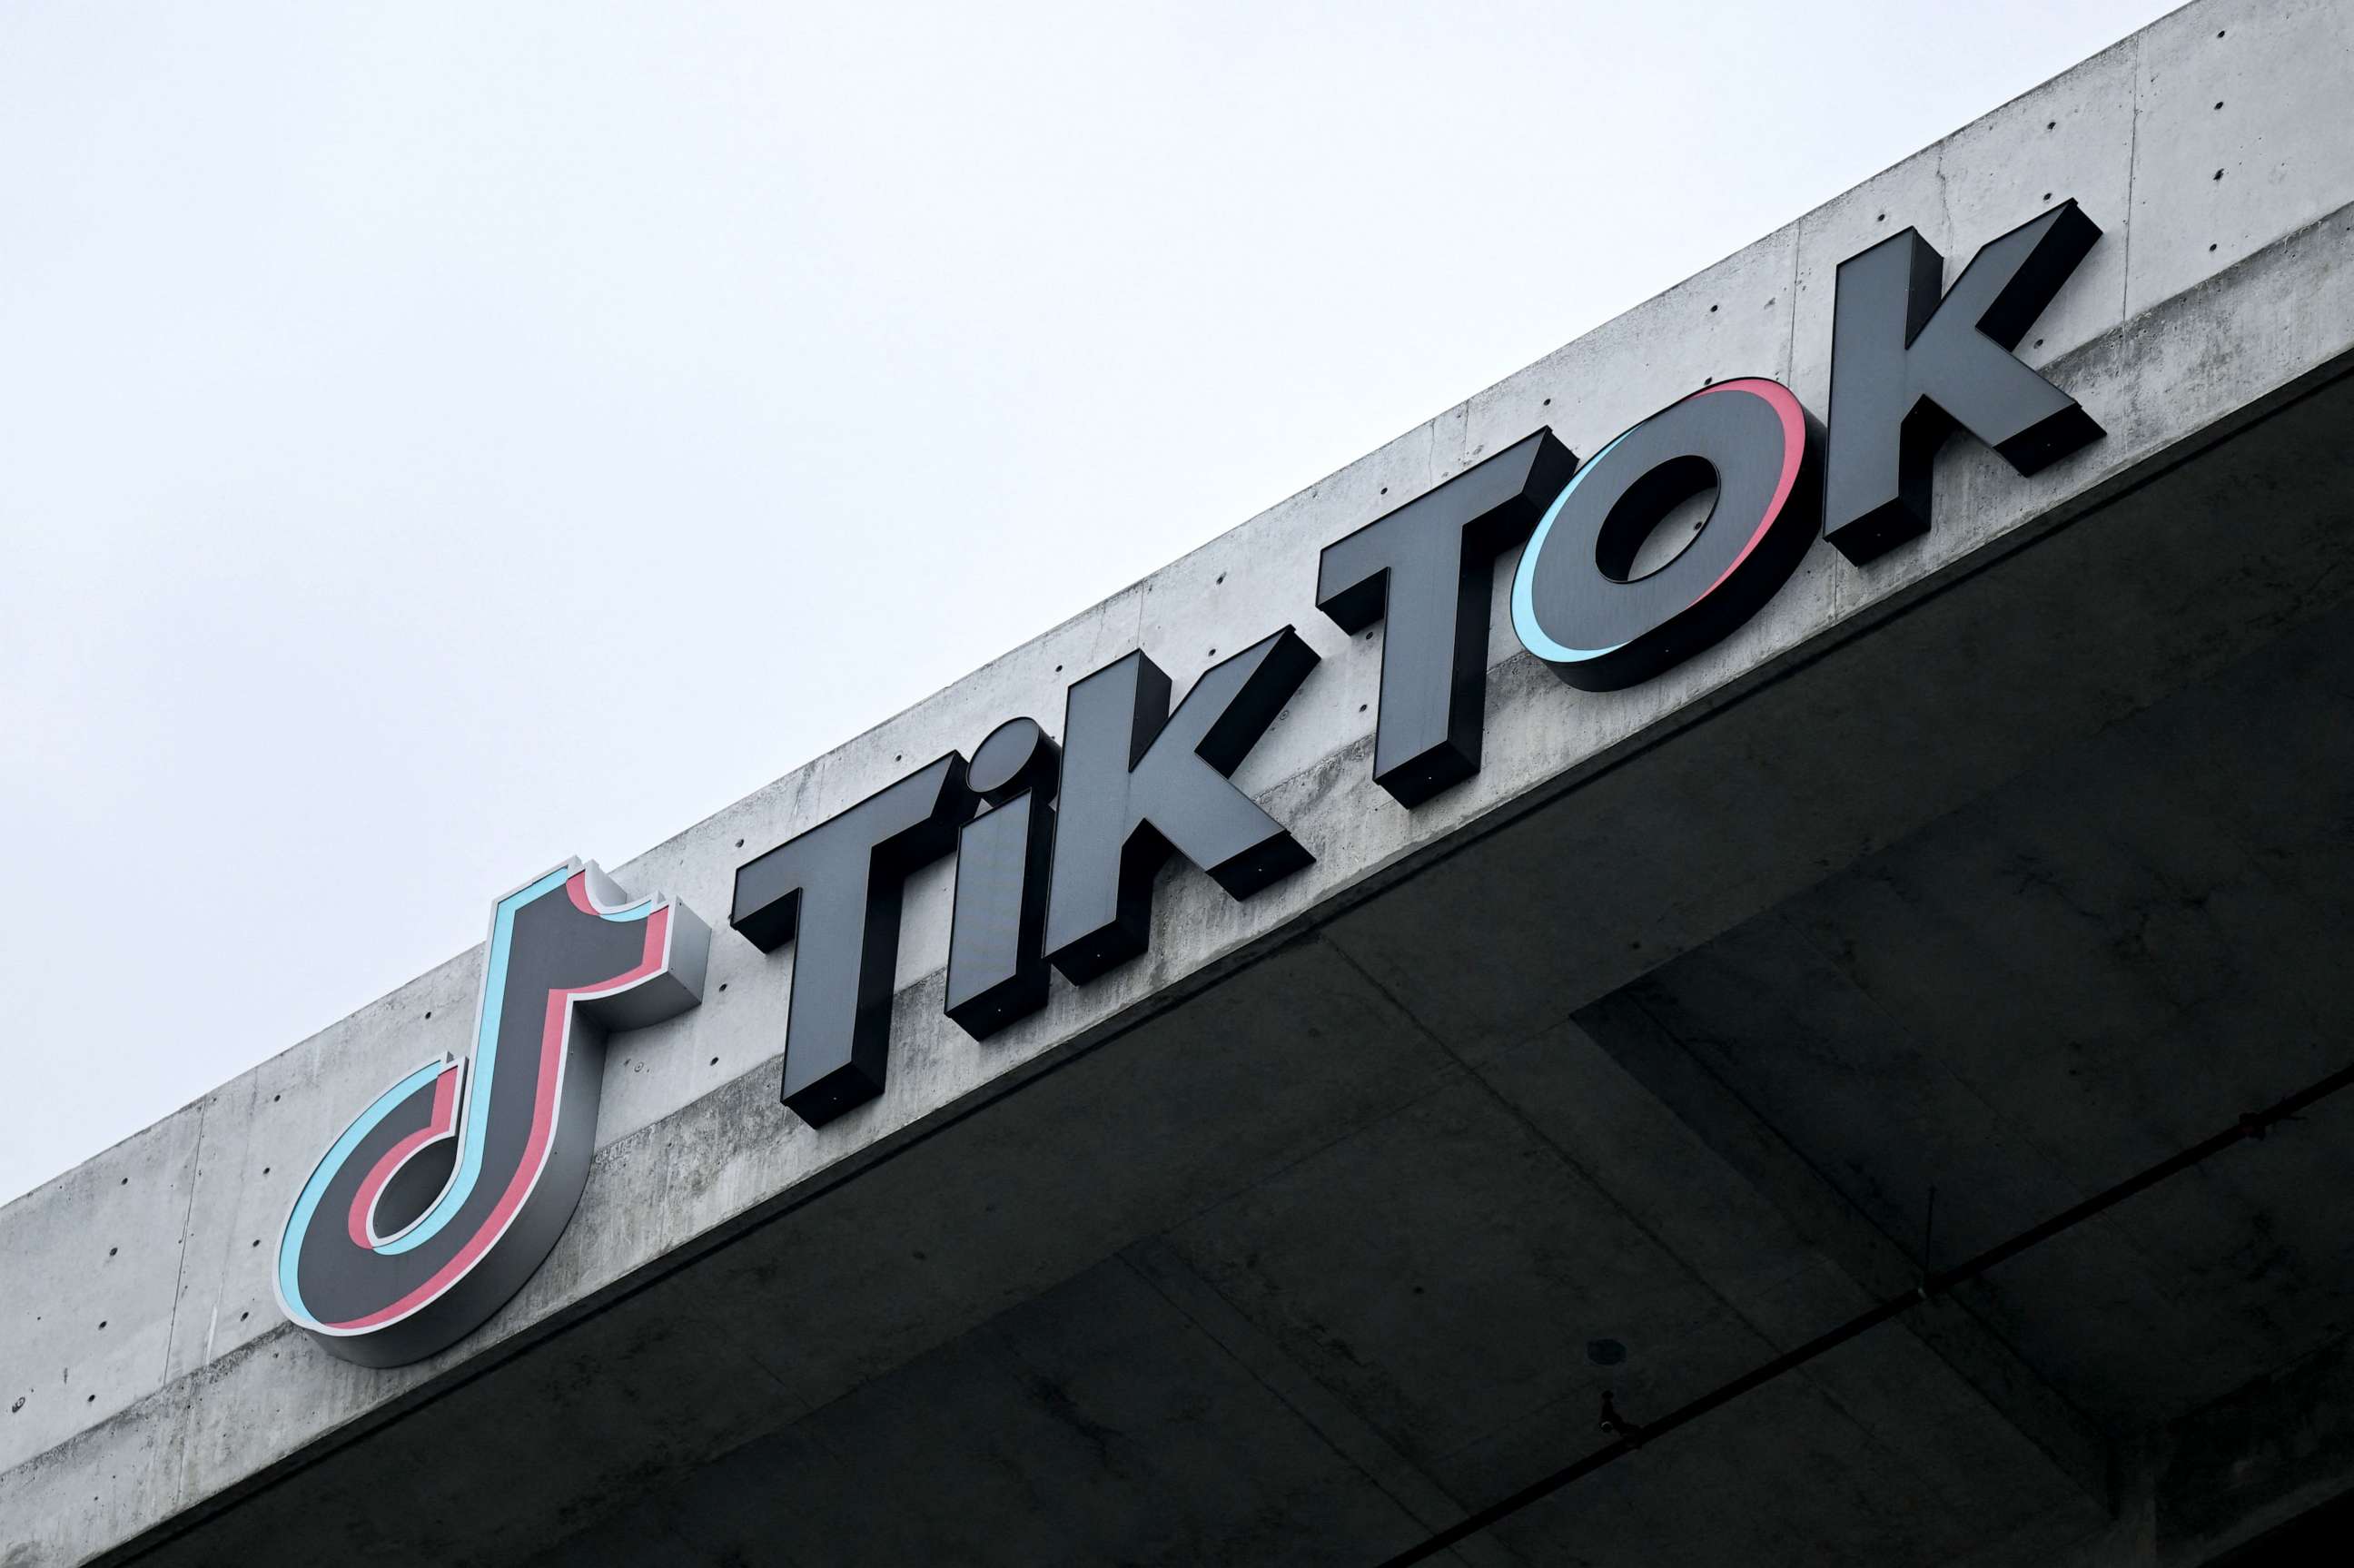 PHOTO: The TikTok logo is displayed on signage outside TikTok social media app company offices in Culver City, California, March 16, 2023.